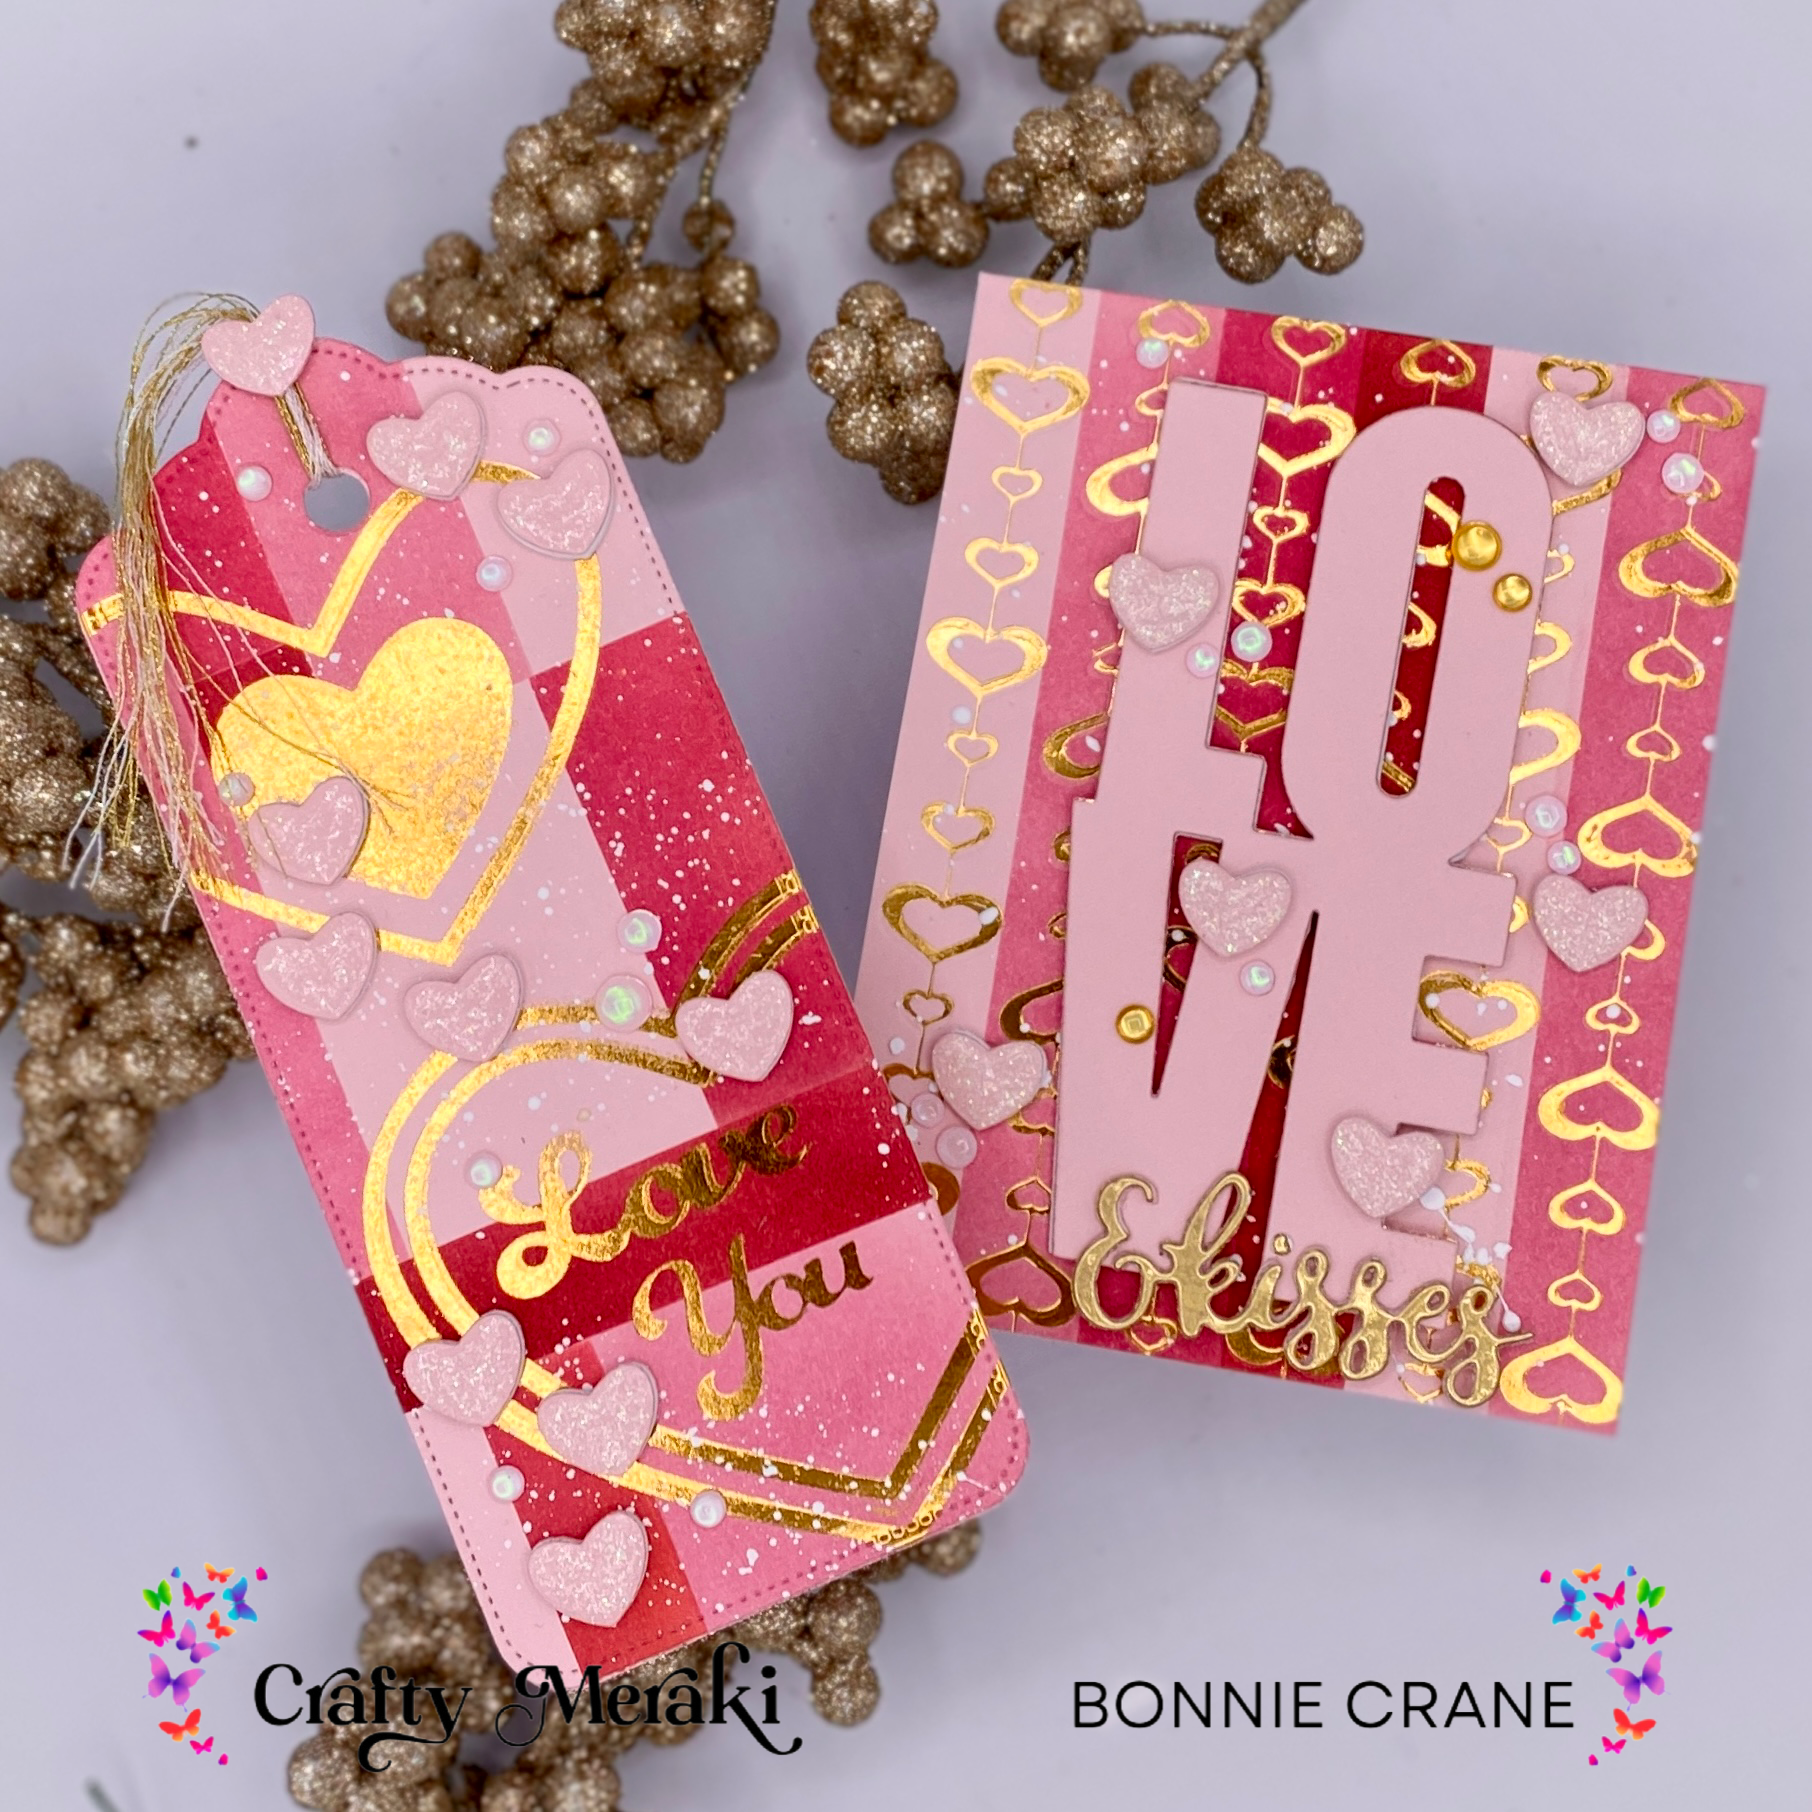 It’s All About Love … Hot Foiling on Colour Blocked Backgrounds